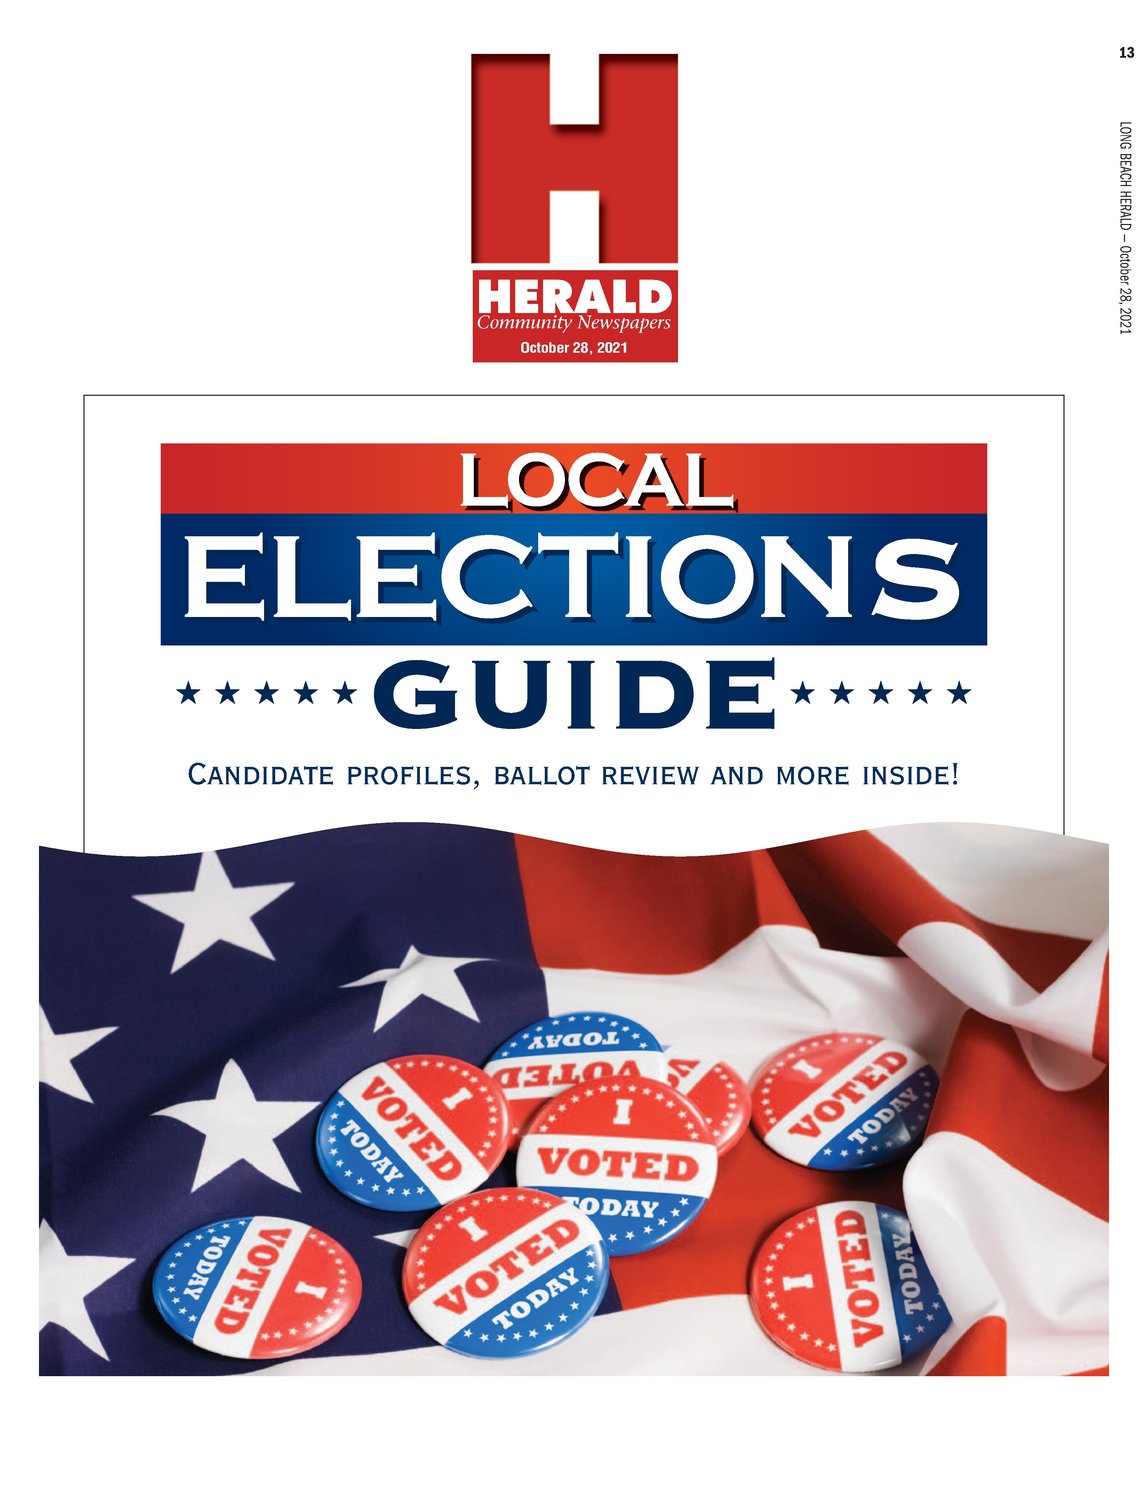 Long Beach 2021 Election Guide Herald Community Newspapers www